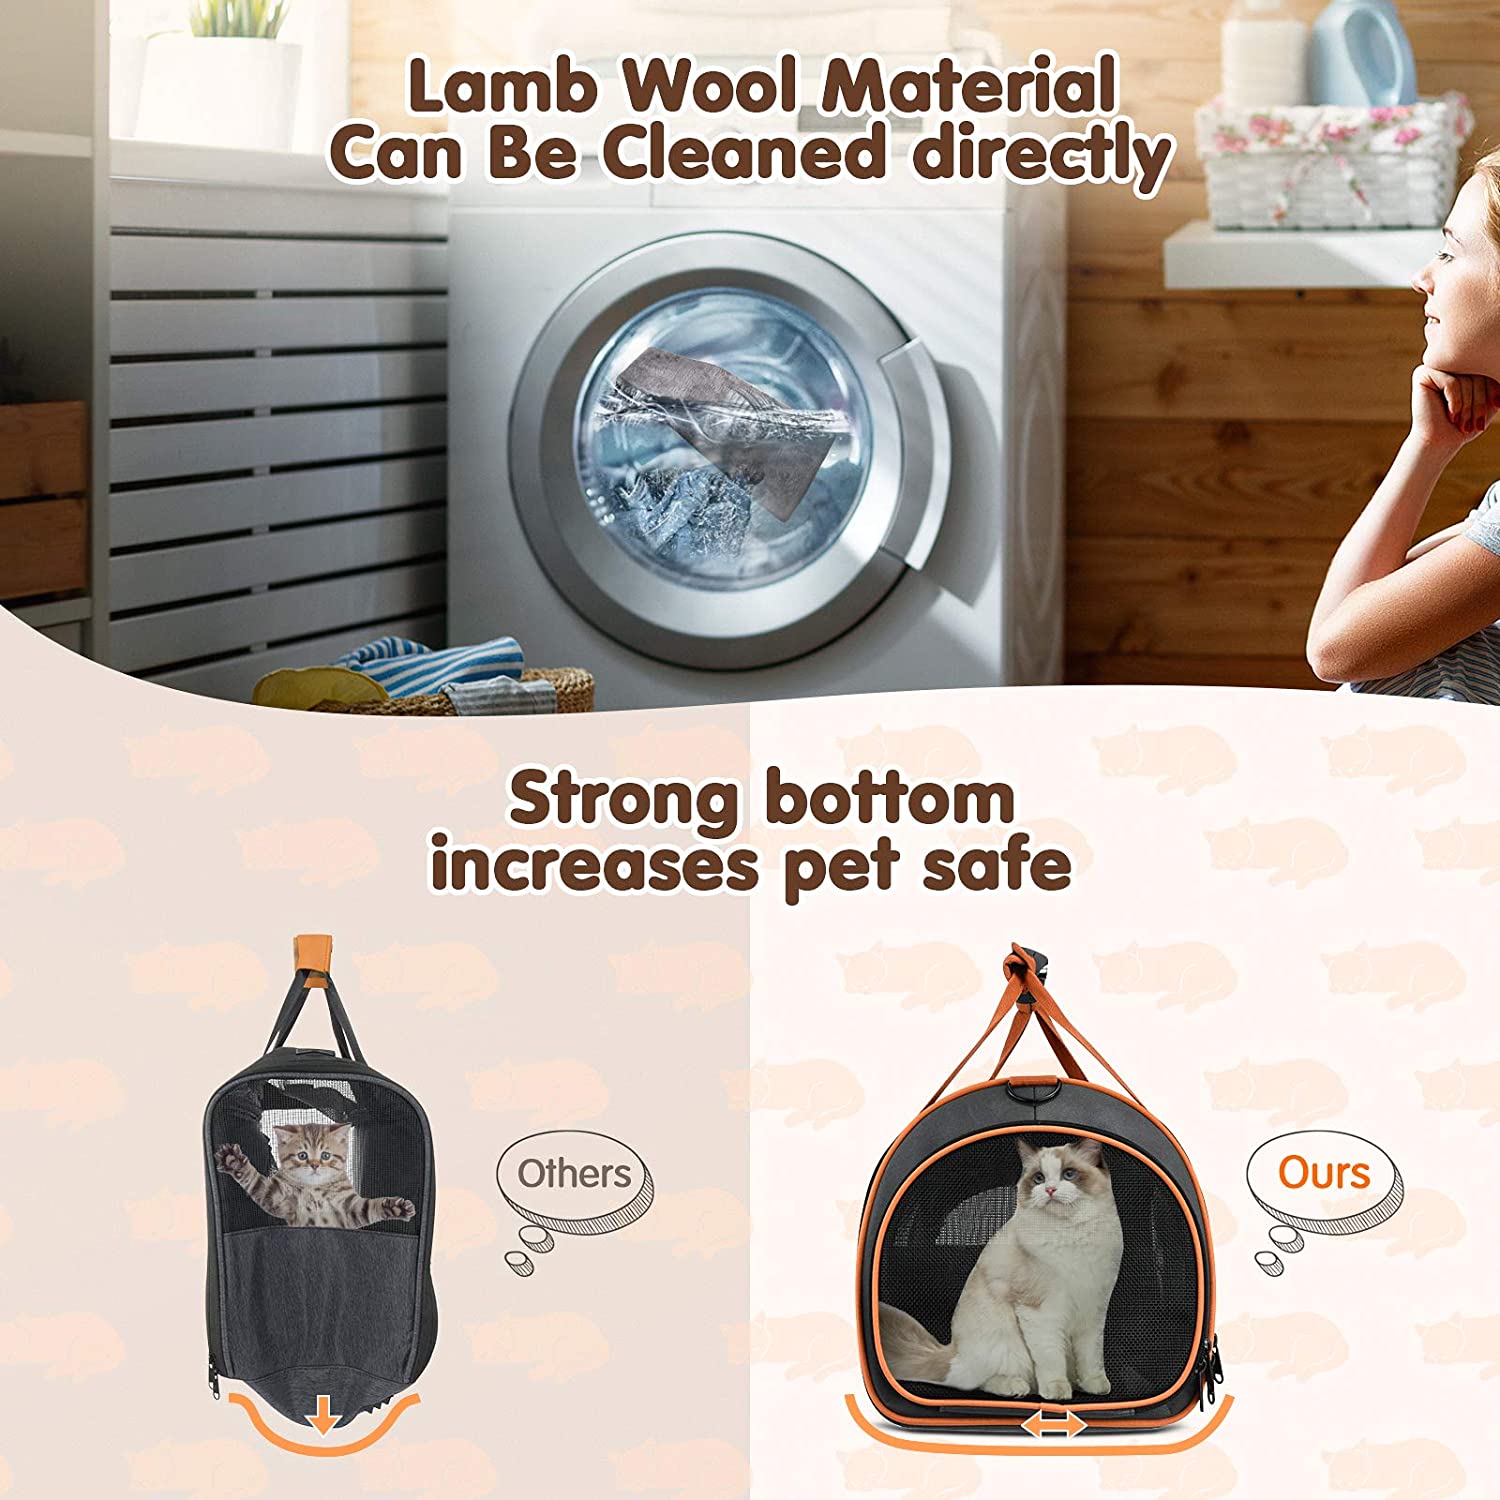 5 Mesh Windows OKMEE Dog Carrier with Ventilation for Small Medium Cats Dogs Puppies TSA Airline Approved Cat Carrier with Big Space 4 Open Doors for Comfortable Travelling. 